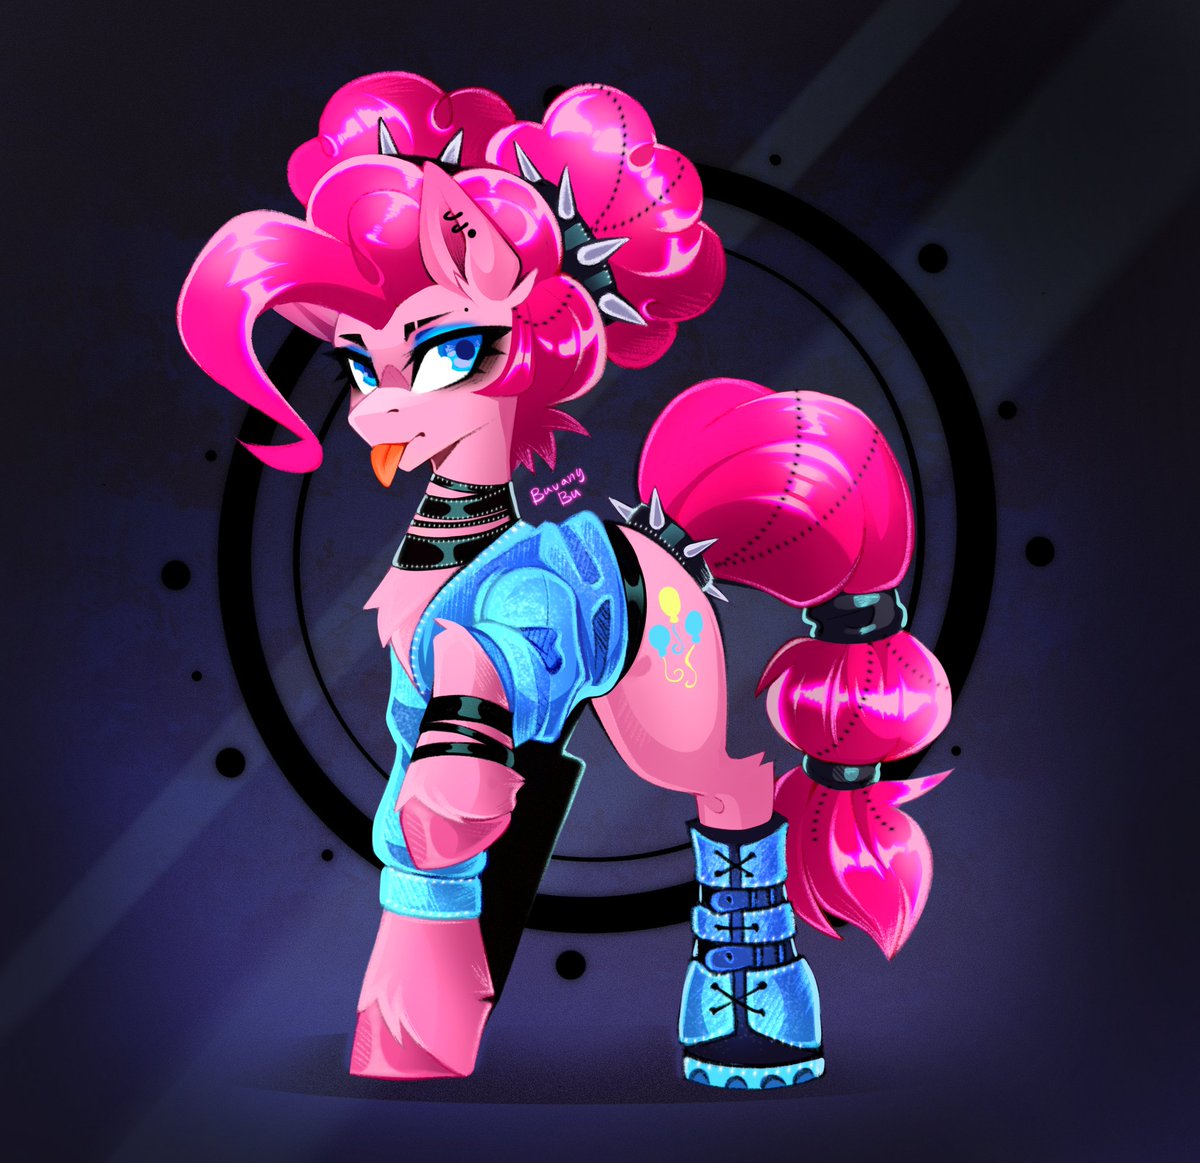 #mlp #pony #Pinkiepie 
What about this style?